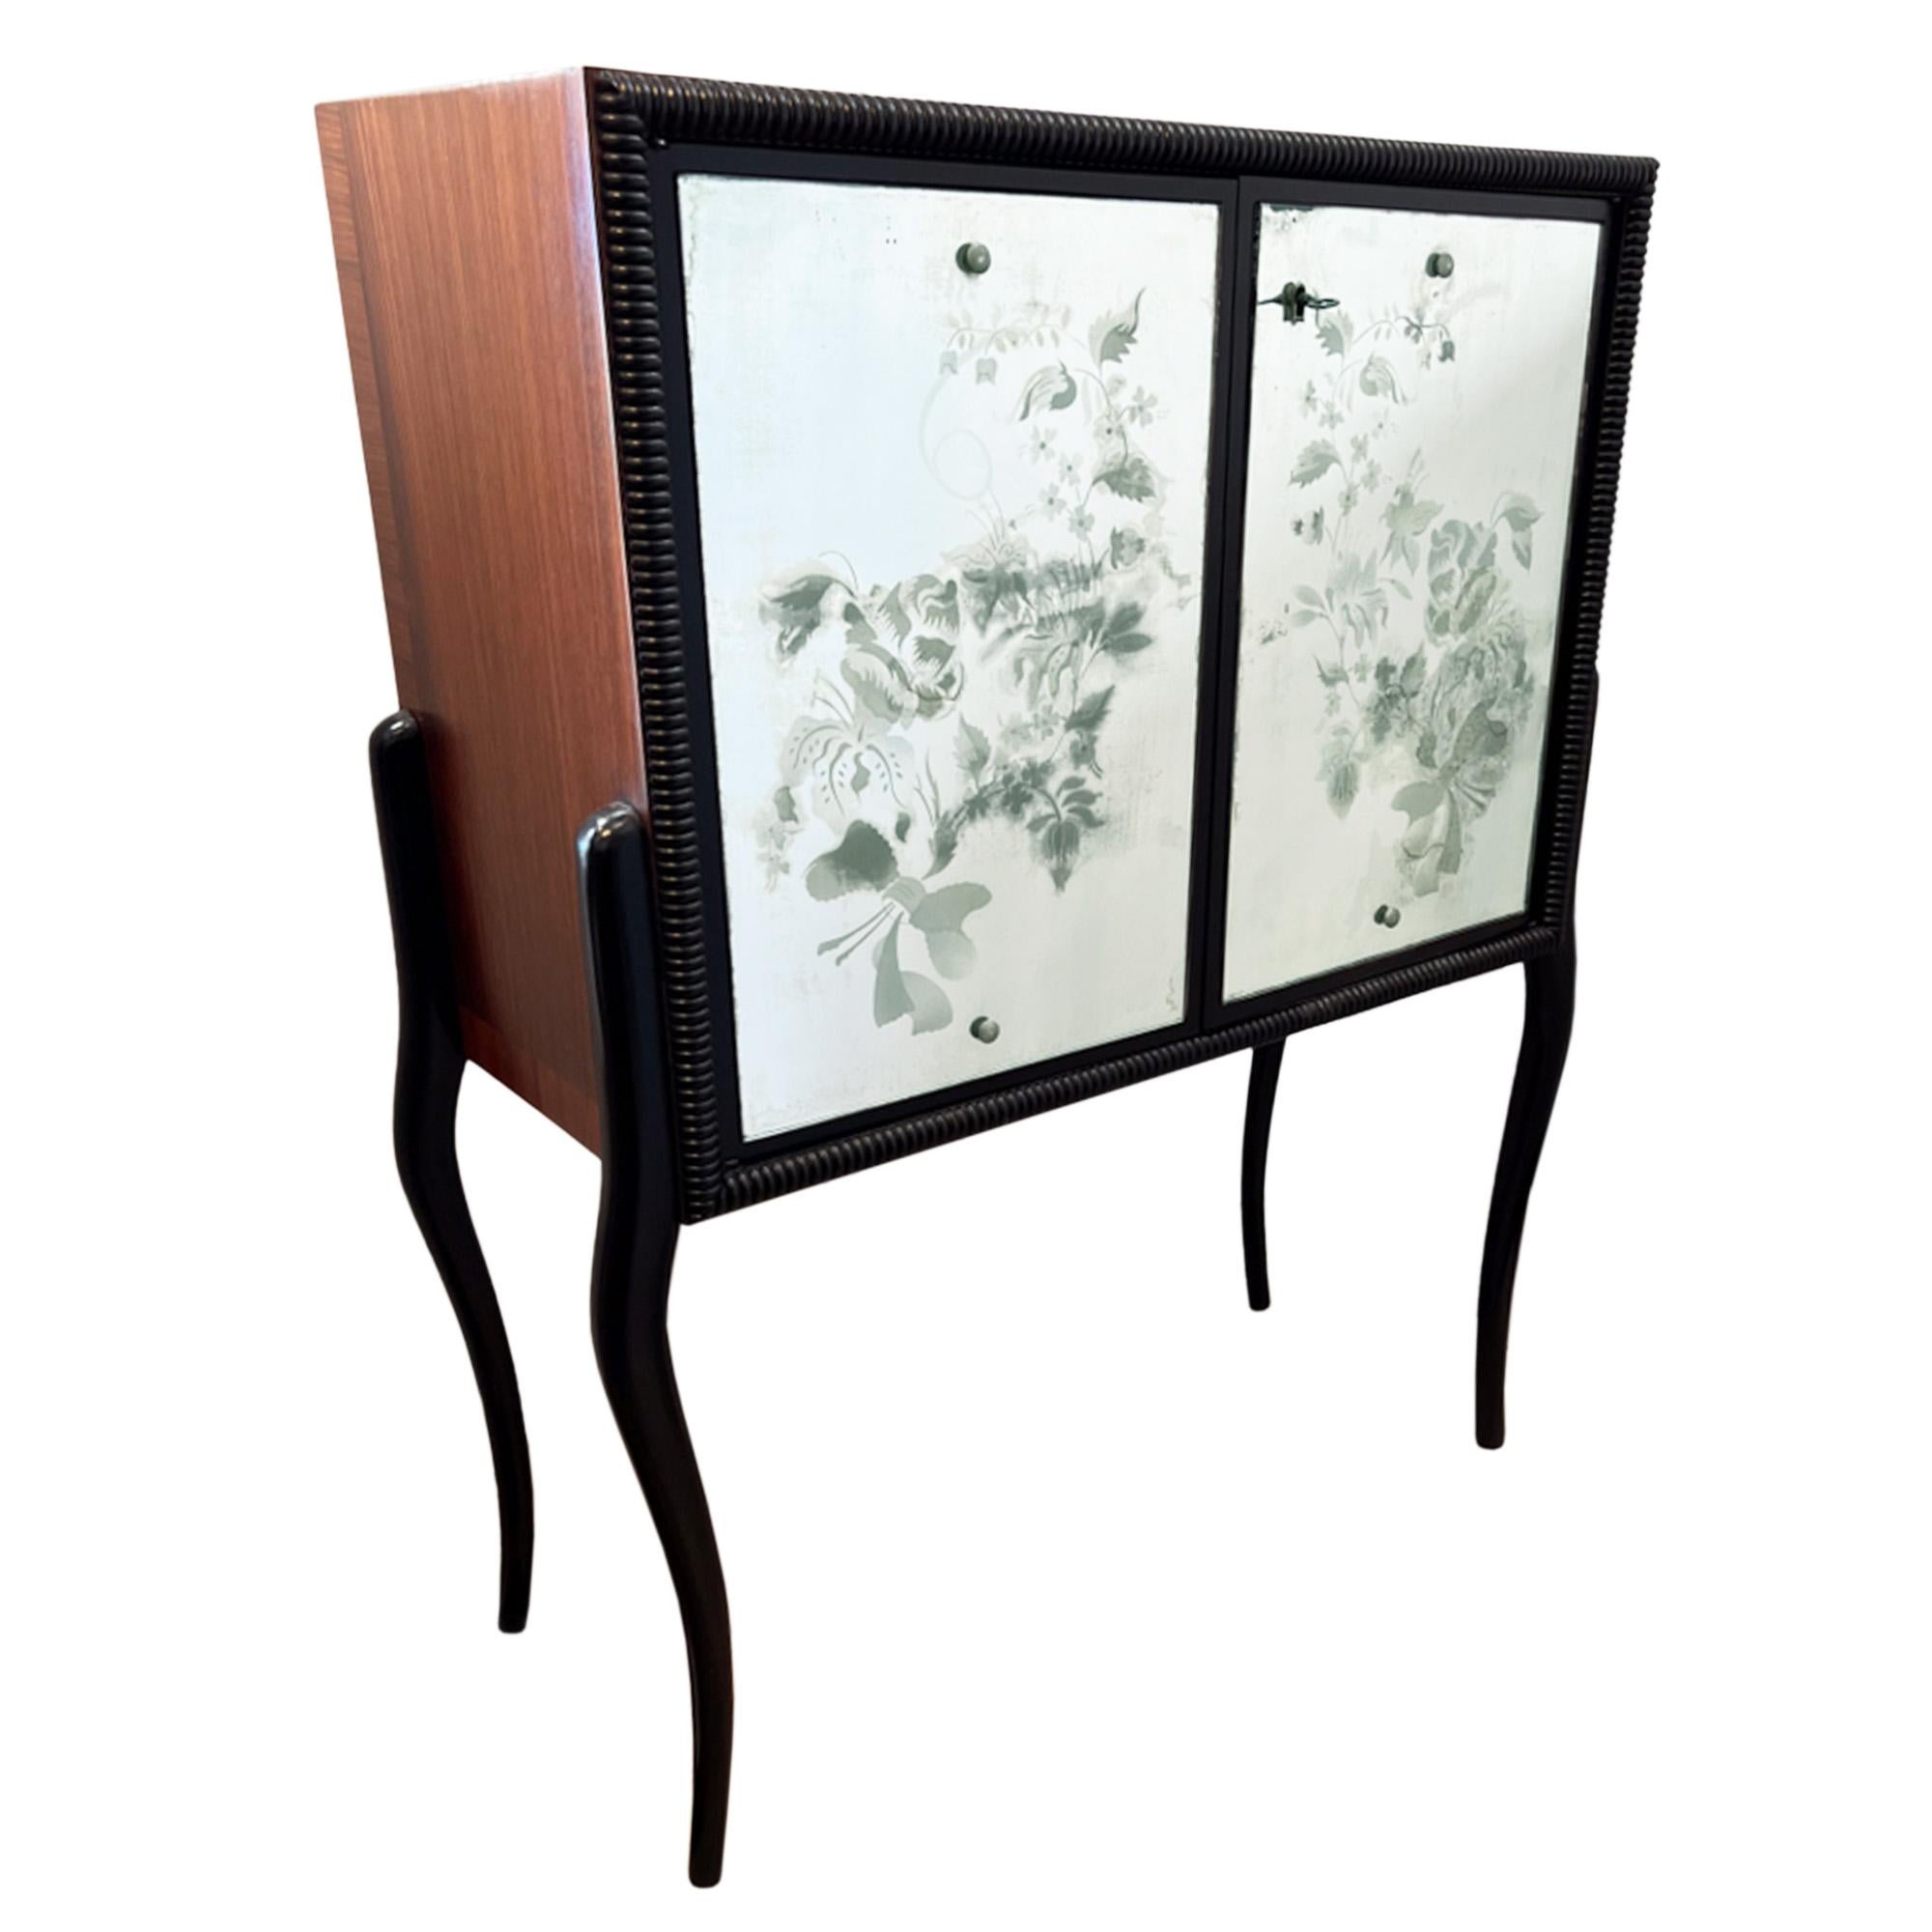 This is a really stylish cocktail cabinet. Made in France in the 1950s, it's crafted from hardwood veneer, ebonised beech and eglomise glass.

The decorative eglomise glass on the doors has a floral design and the interior has a red and gold